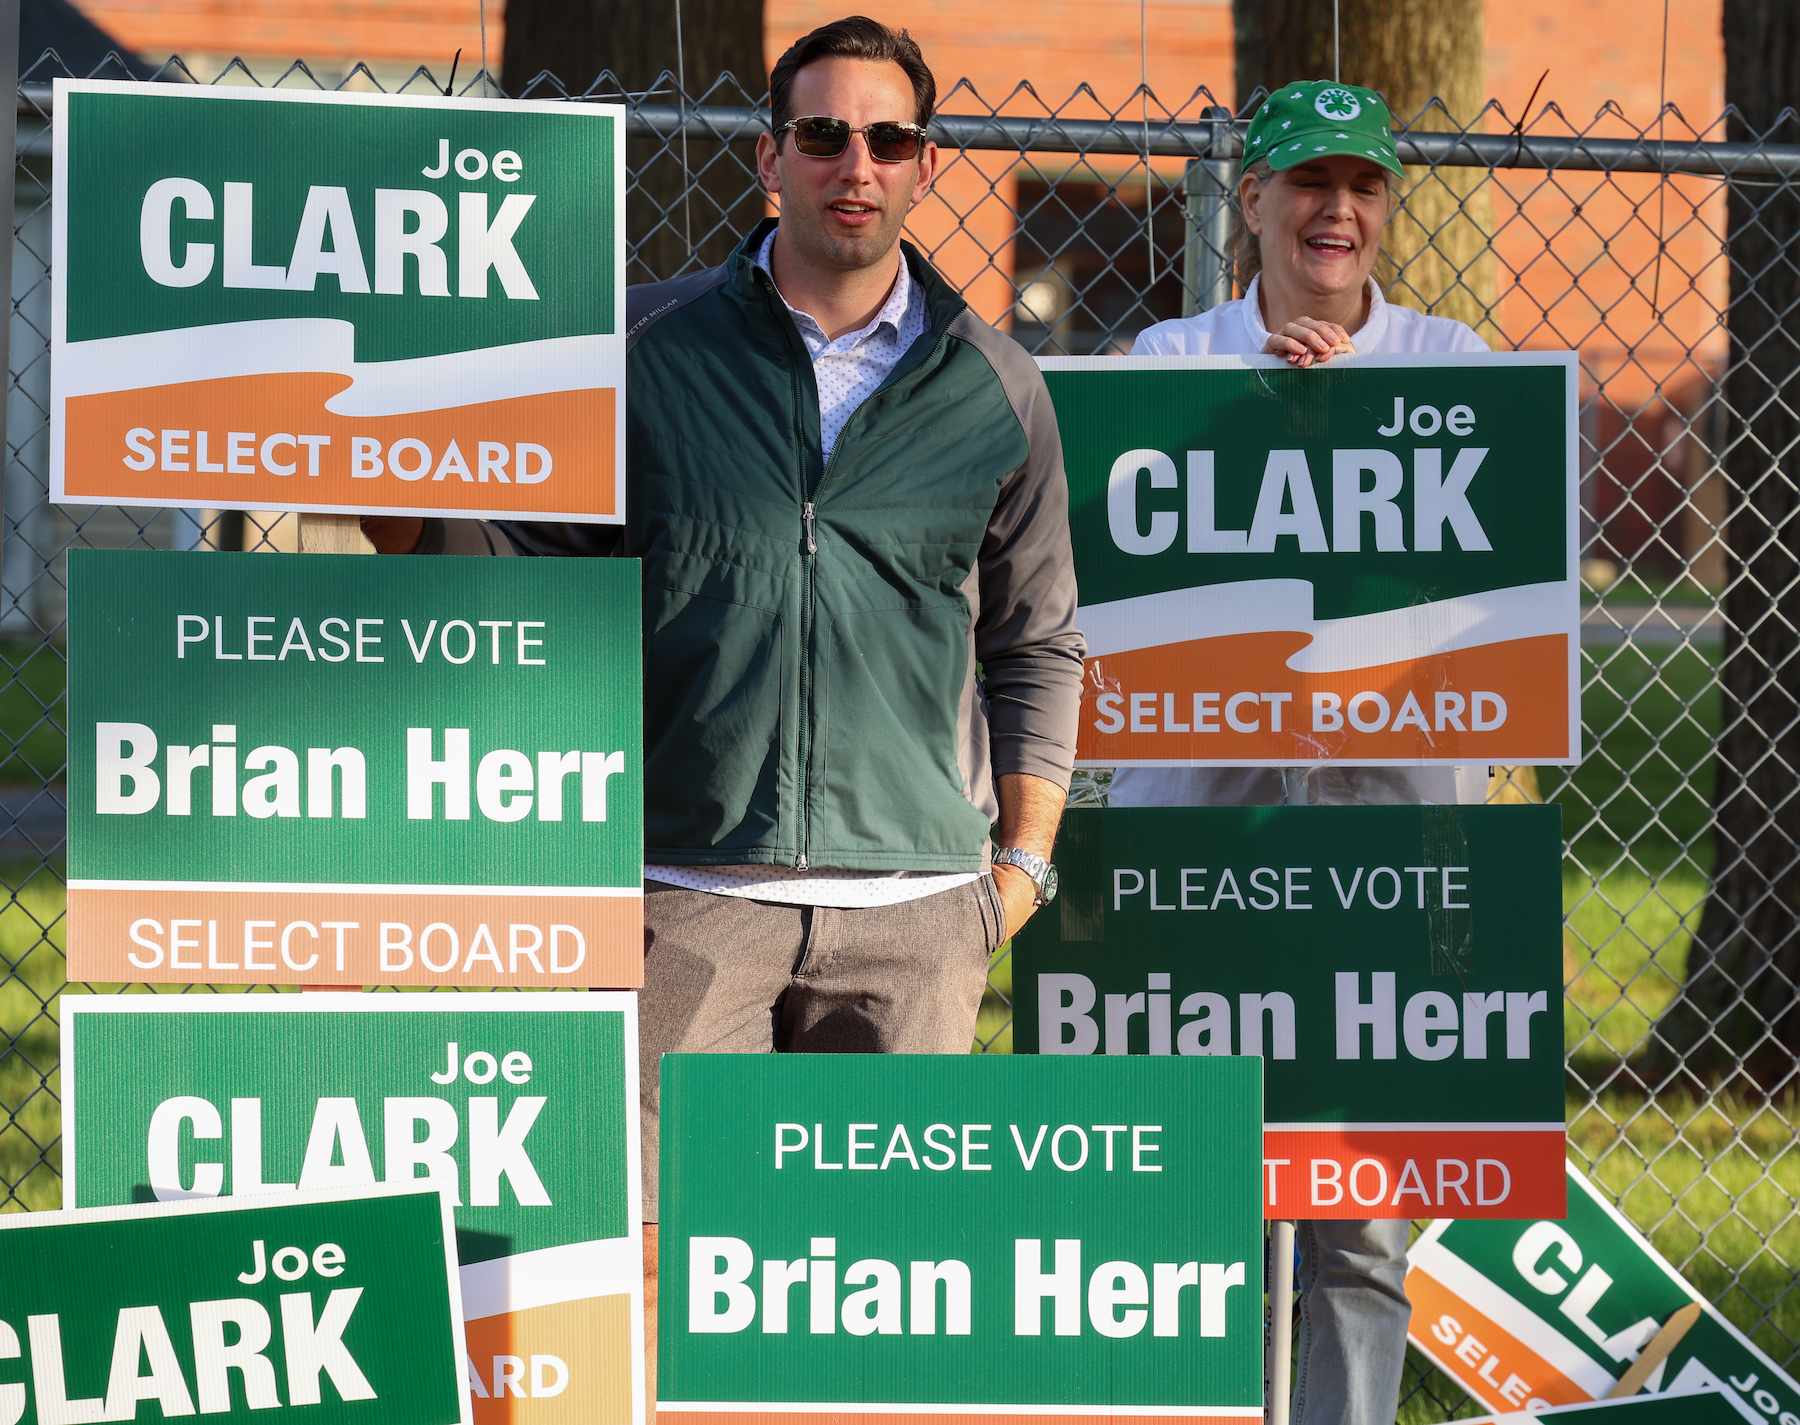 Clark, Herr sail to unofficial victory in Select Board race; Hopkins project leads in close vote